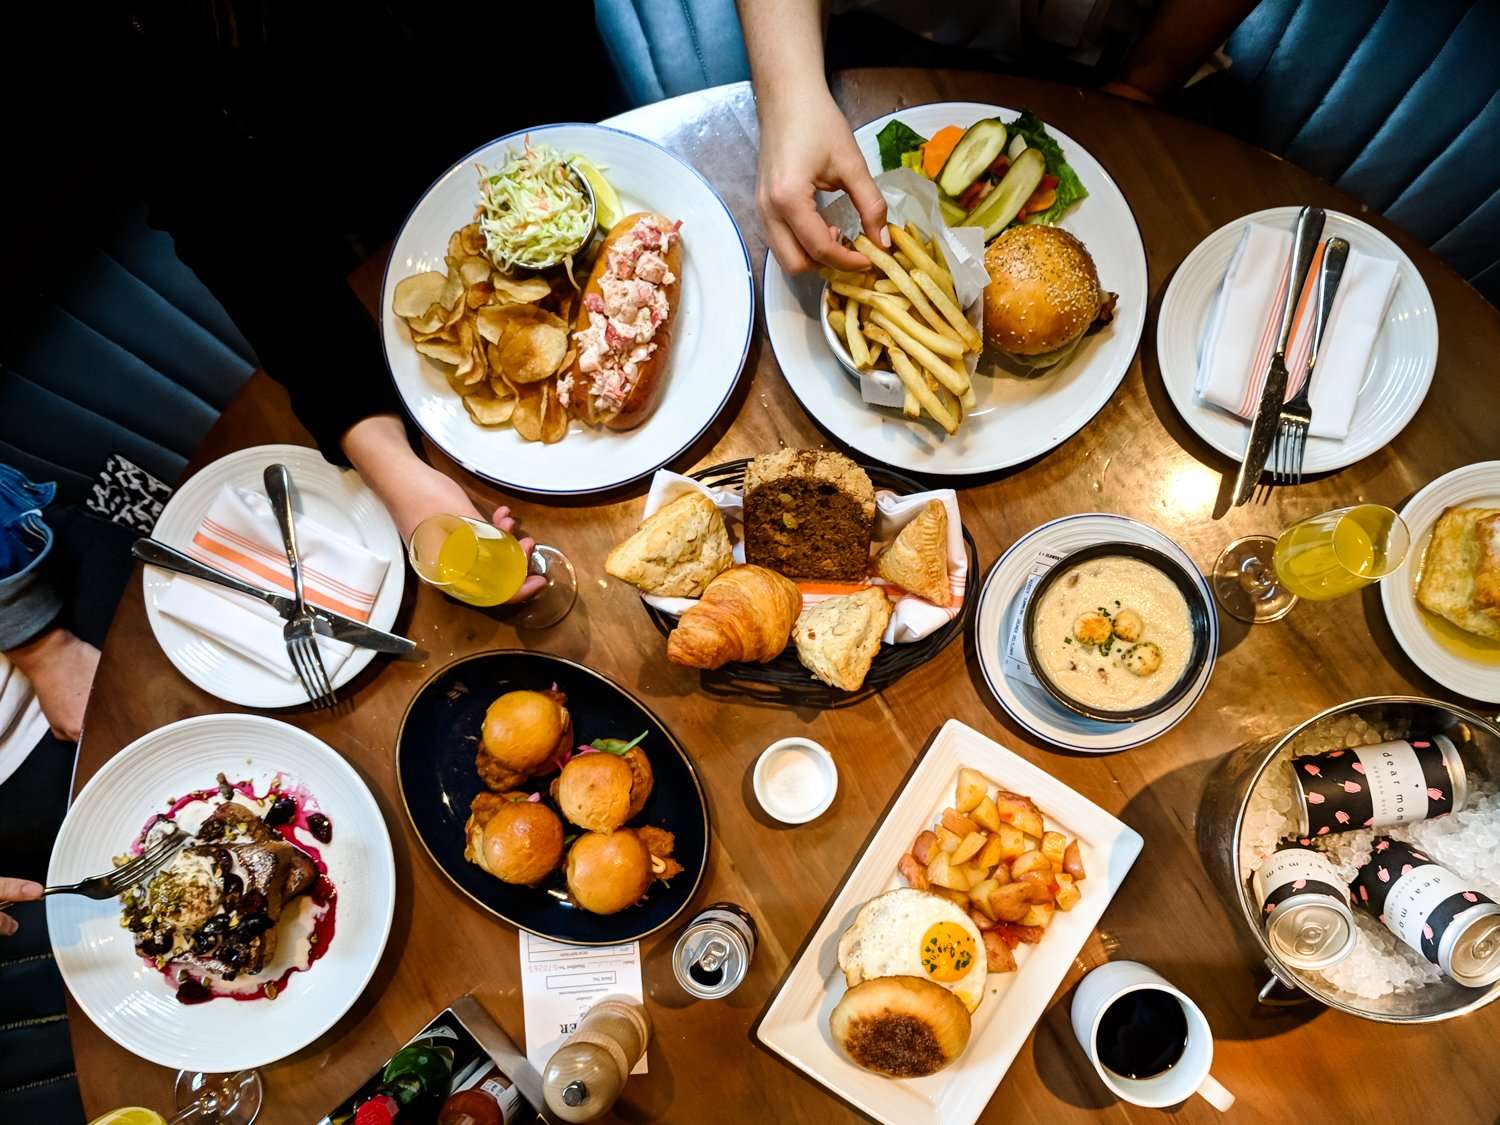 Island Creek Oyster Bar brunch in Boston | The Stopover